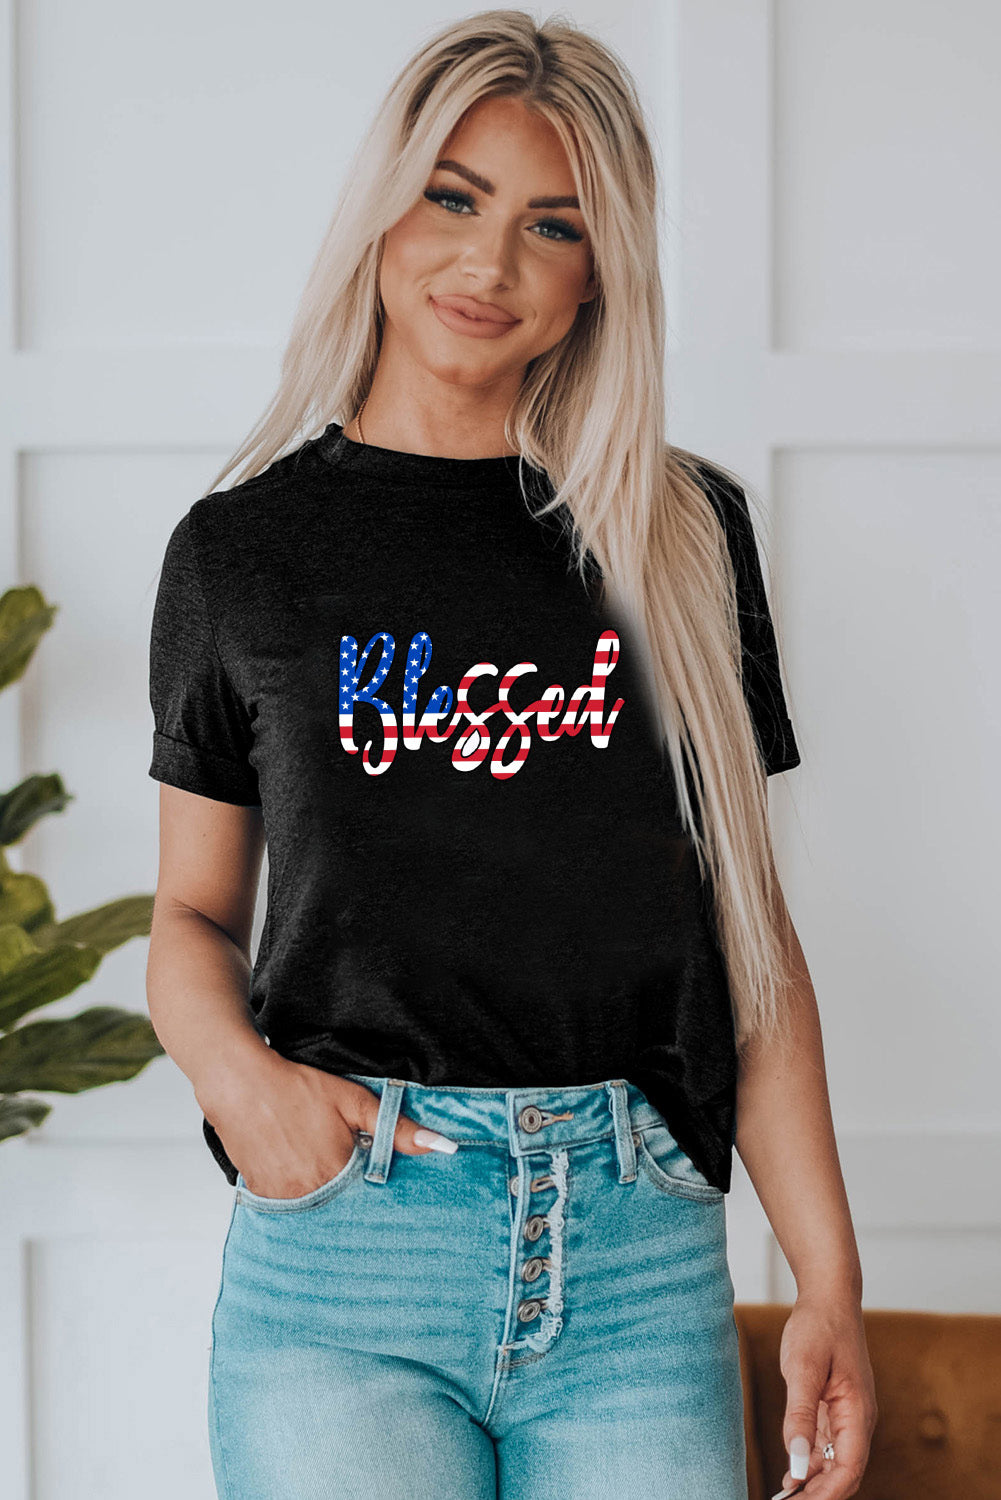 American BLESSED USA Flag Top Round Neck Shortsleeve Tee Shirt